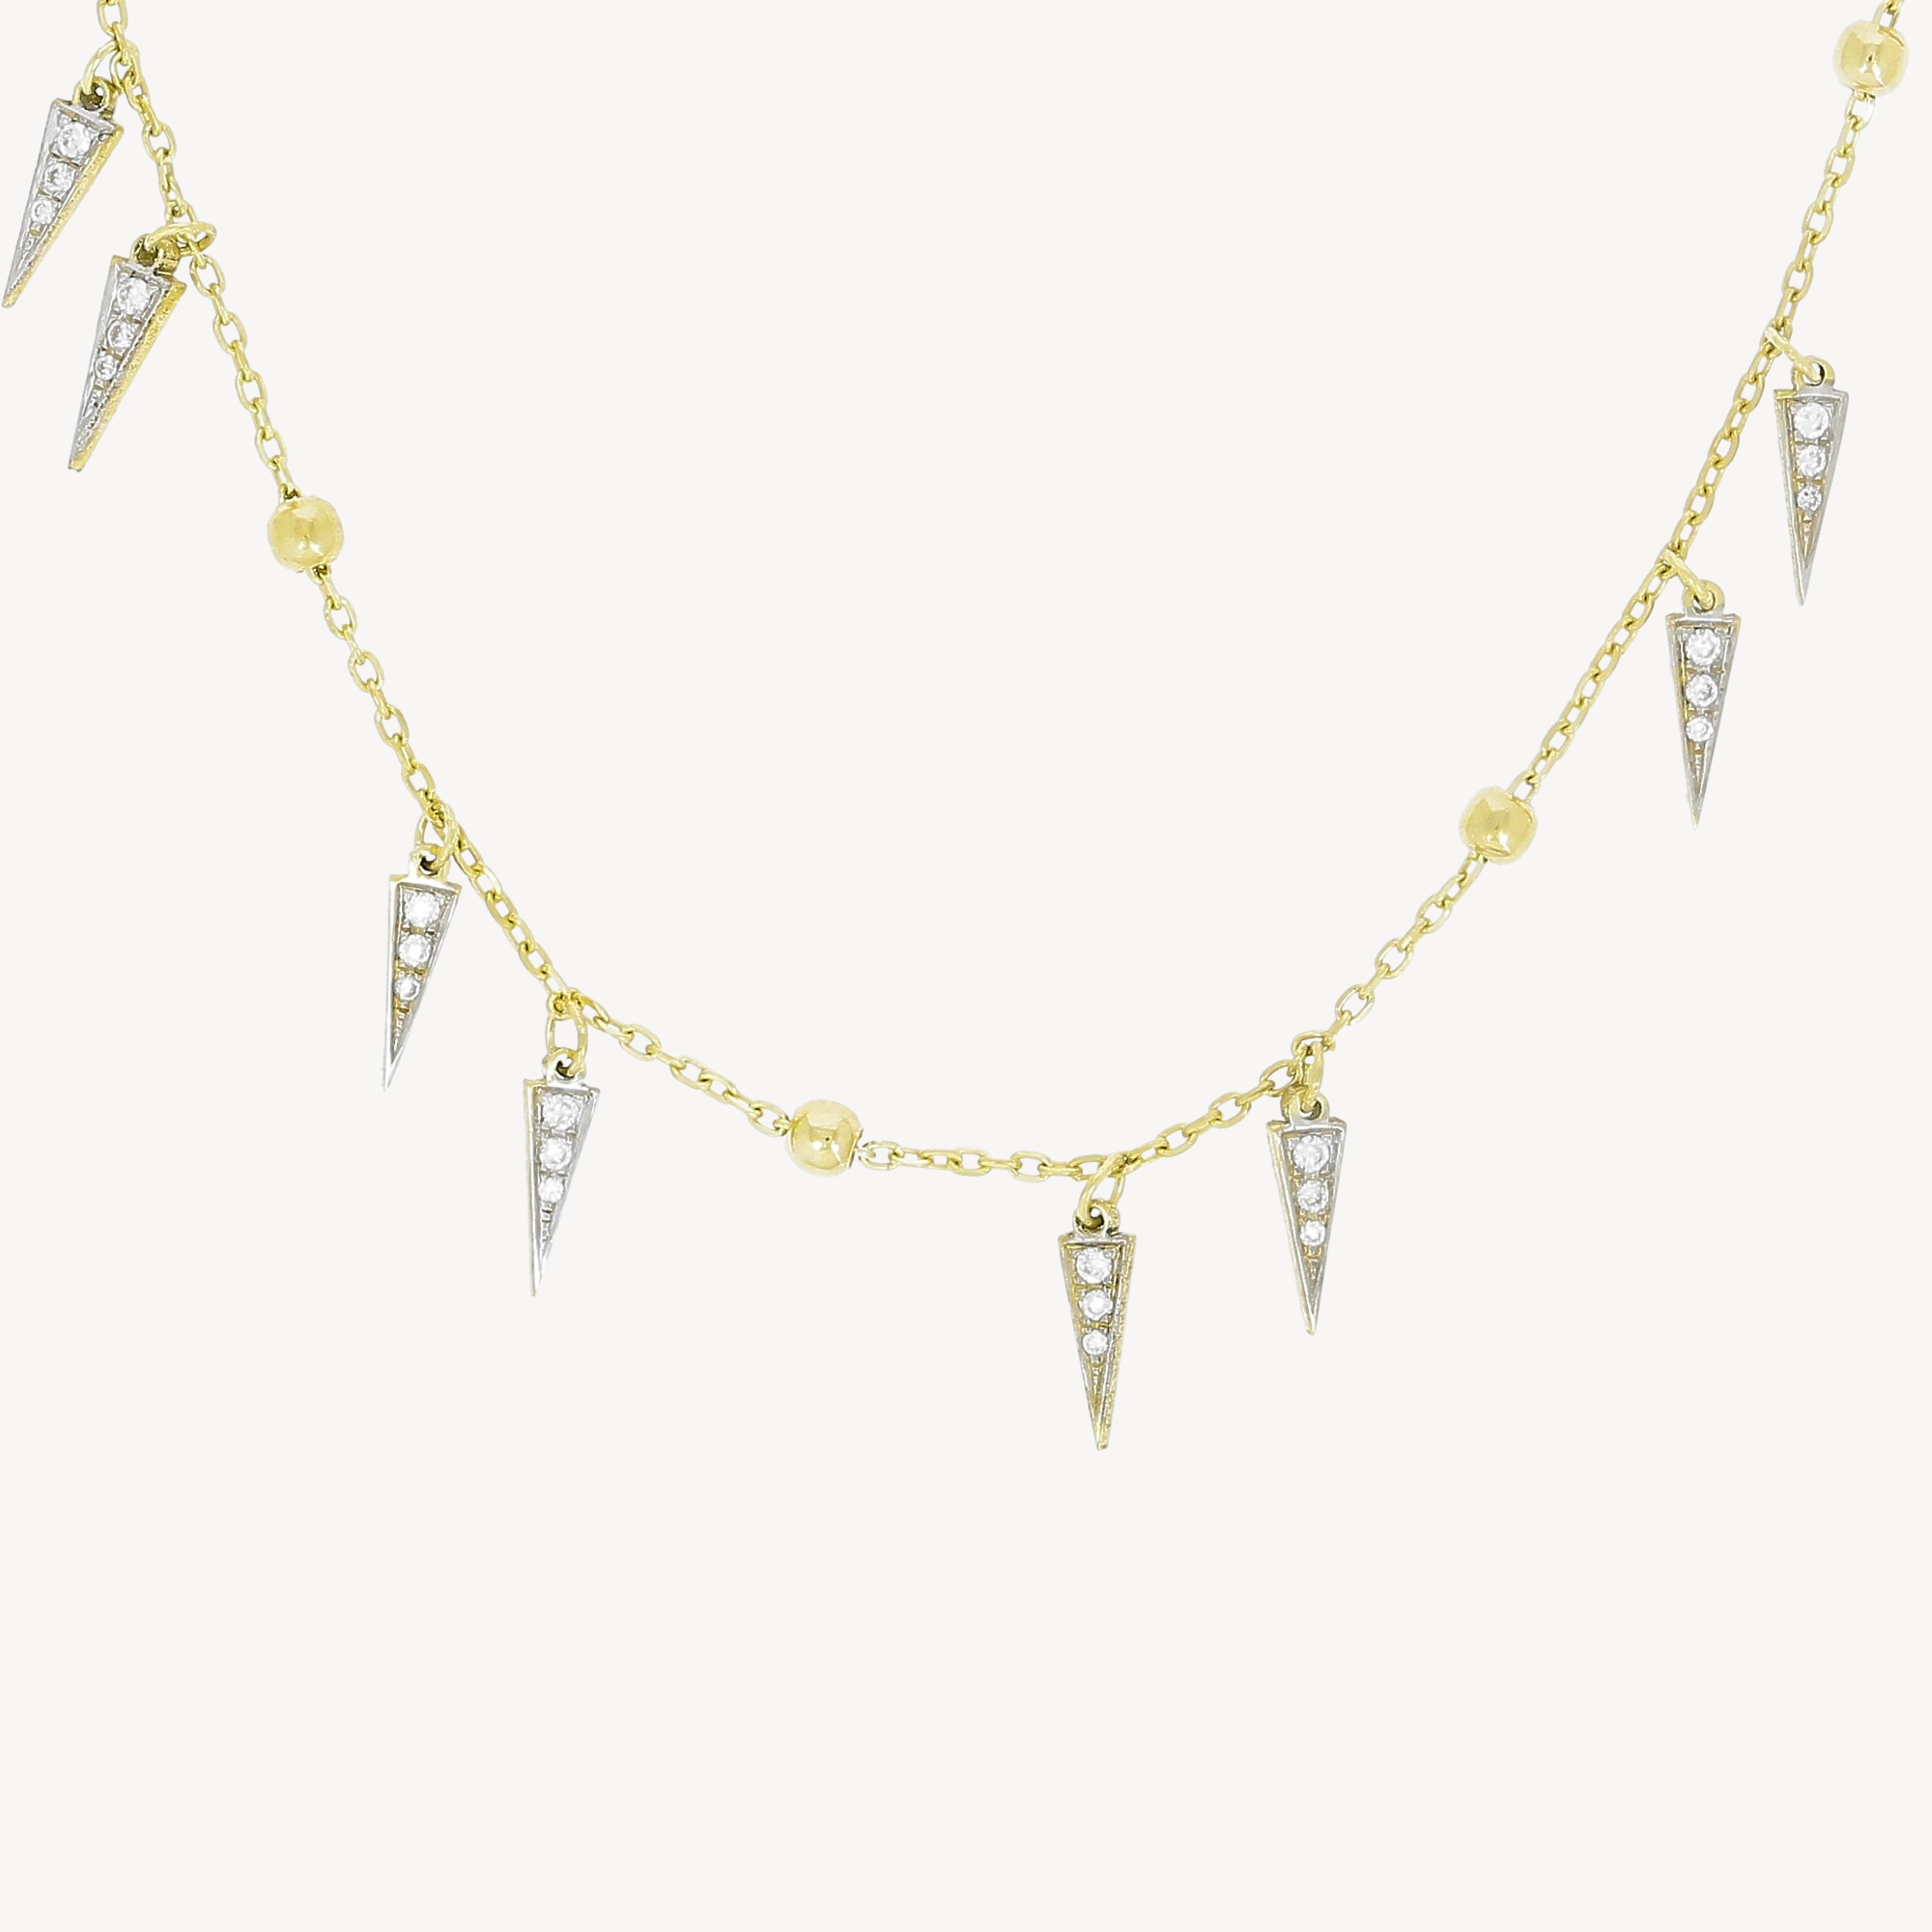 Spikes on Chain Choker Necklace